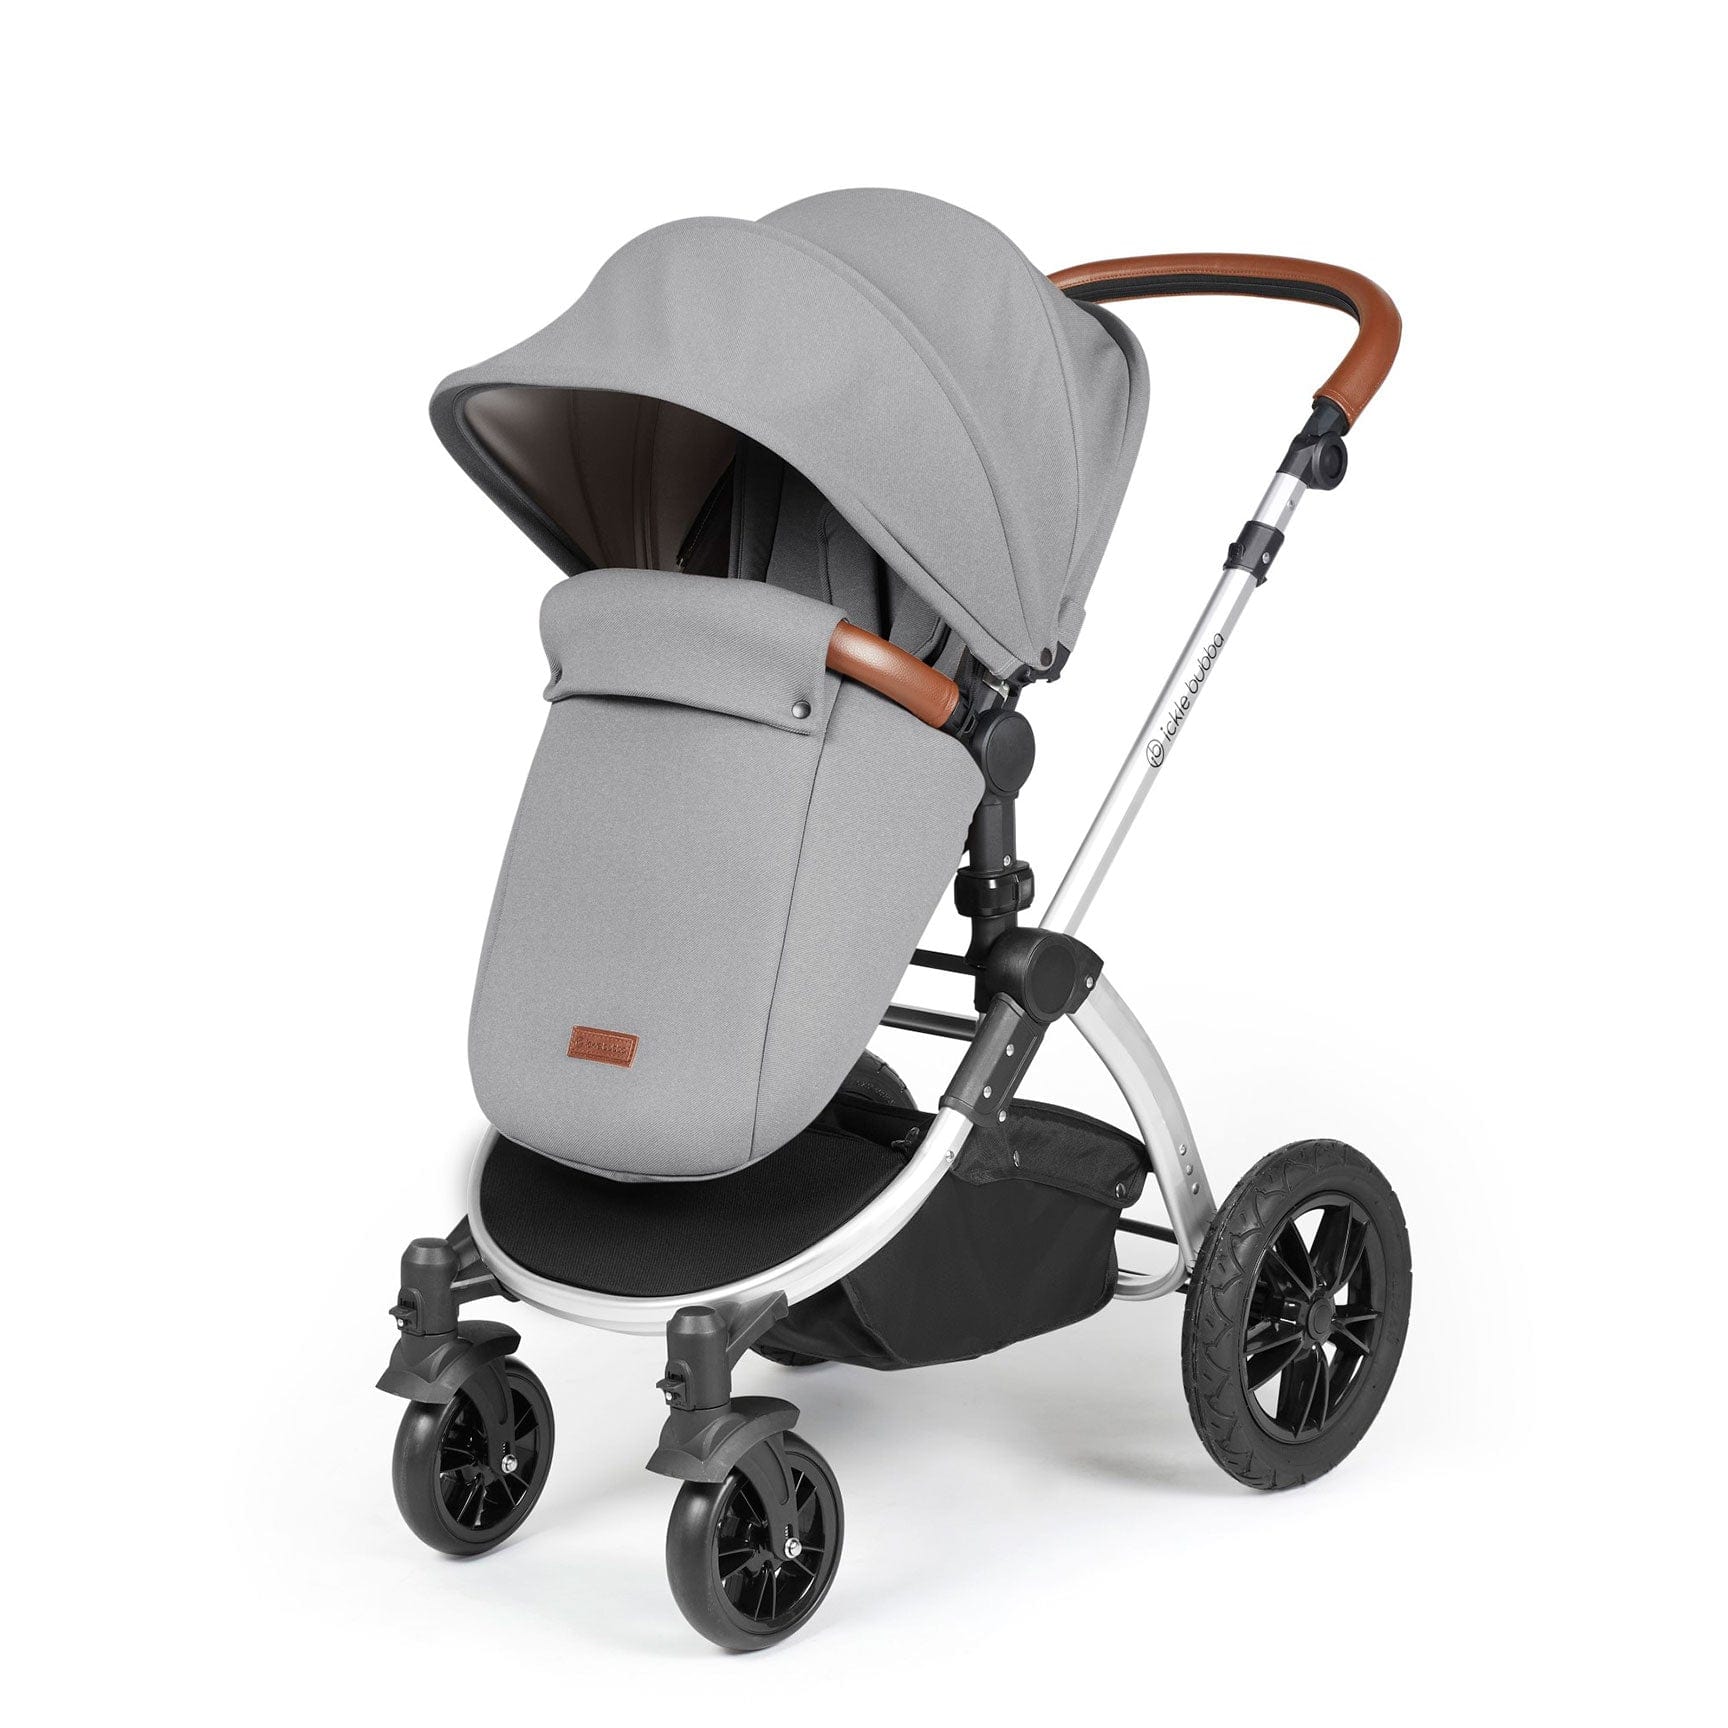 Ickle Bubba Stomp Luxe All-in-One Travel System with Isofix Base in Silver/Pearl Grey/Tan Travel Systems 10-011-300-260 5056515026566